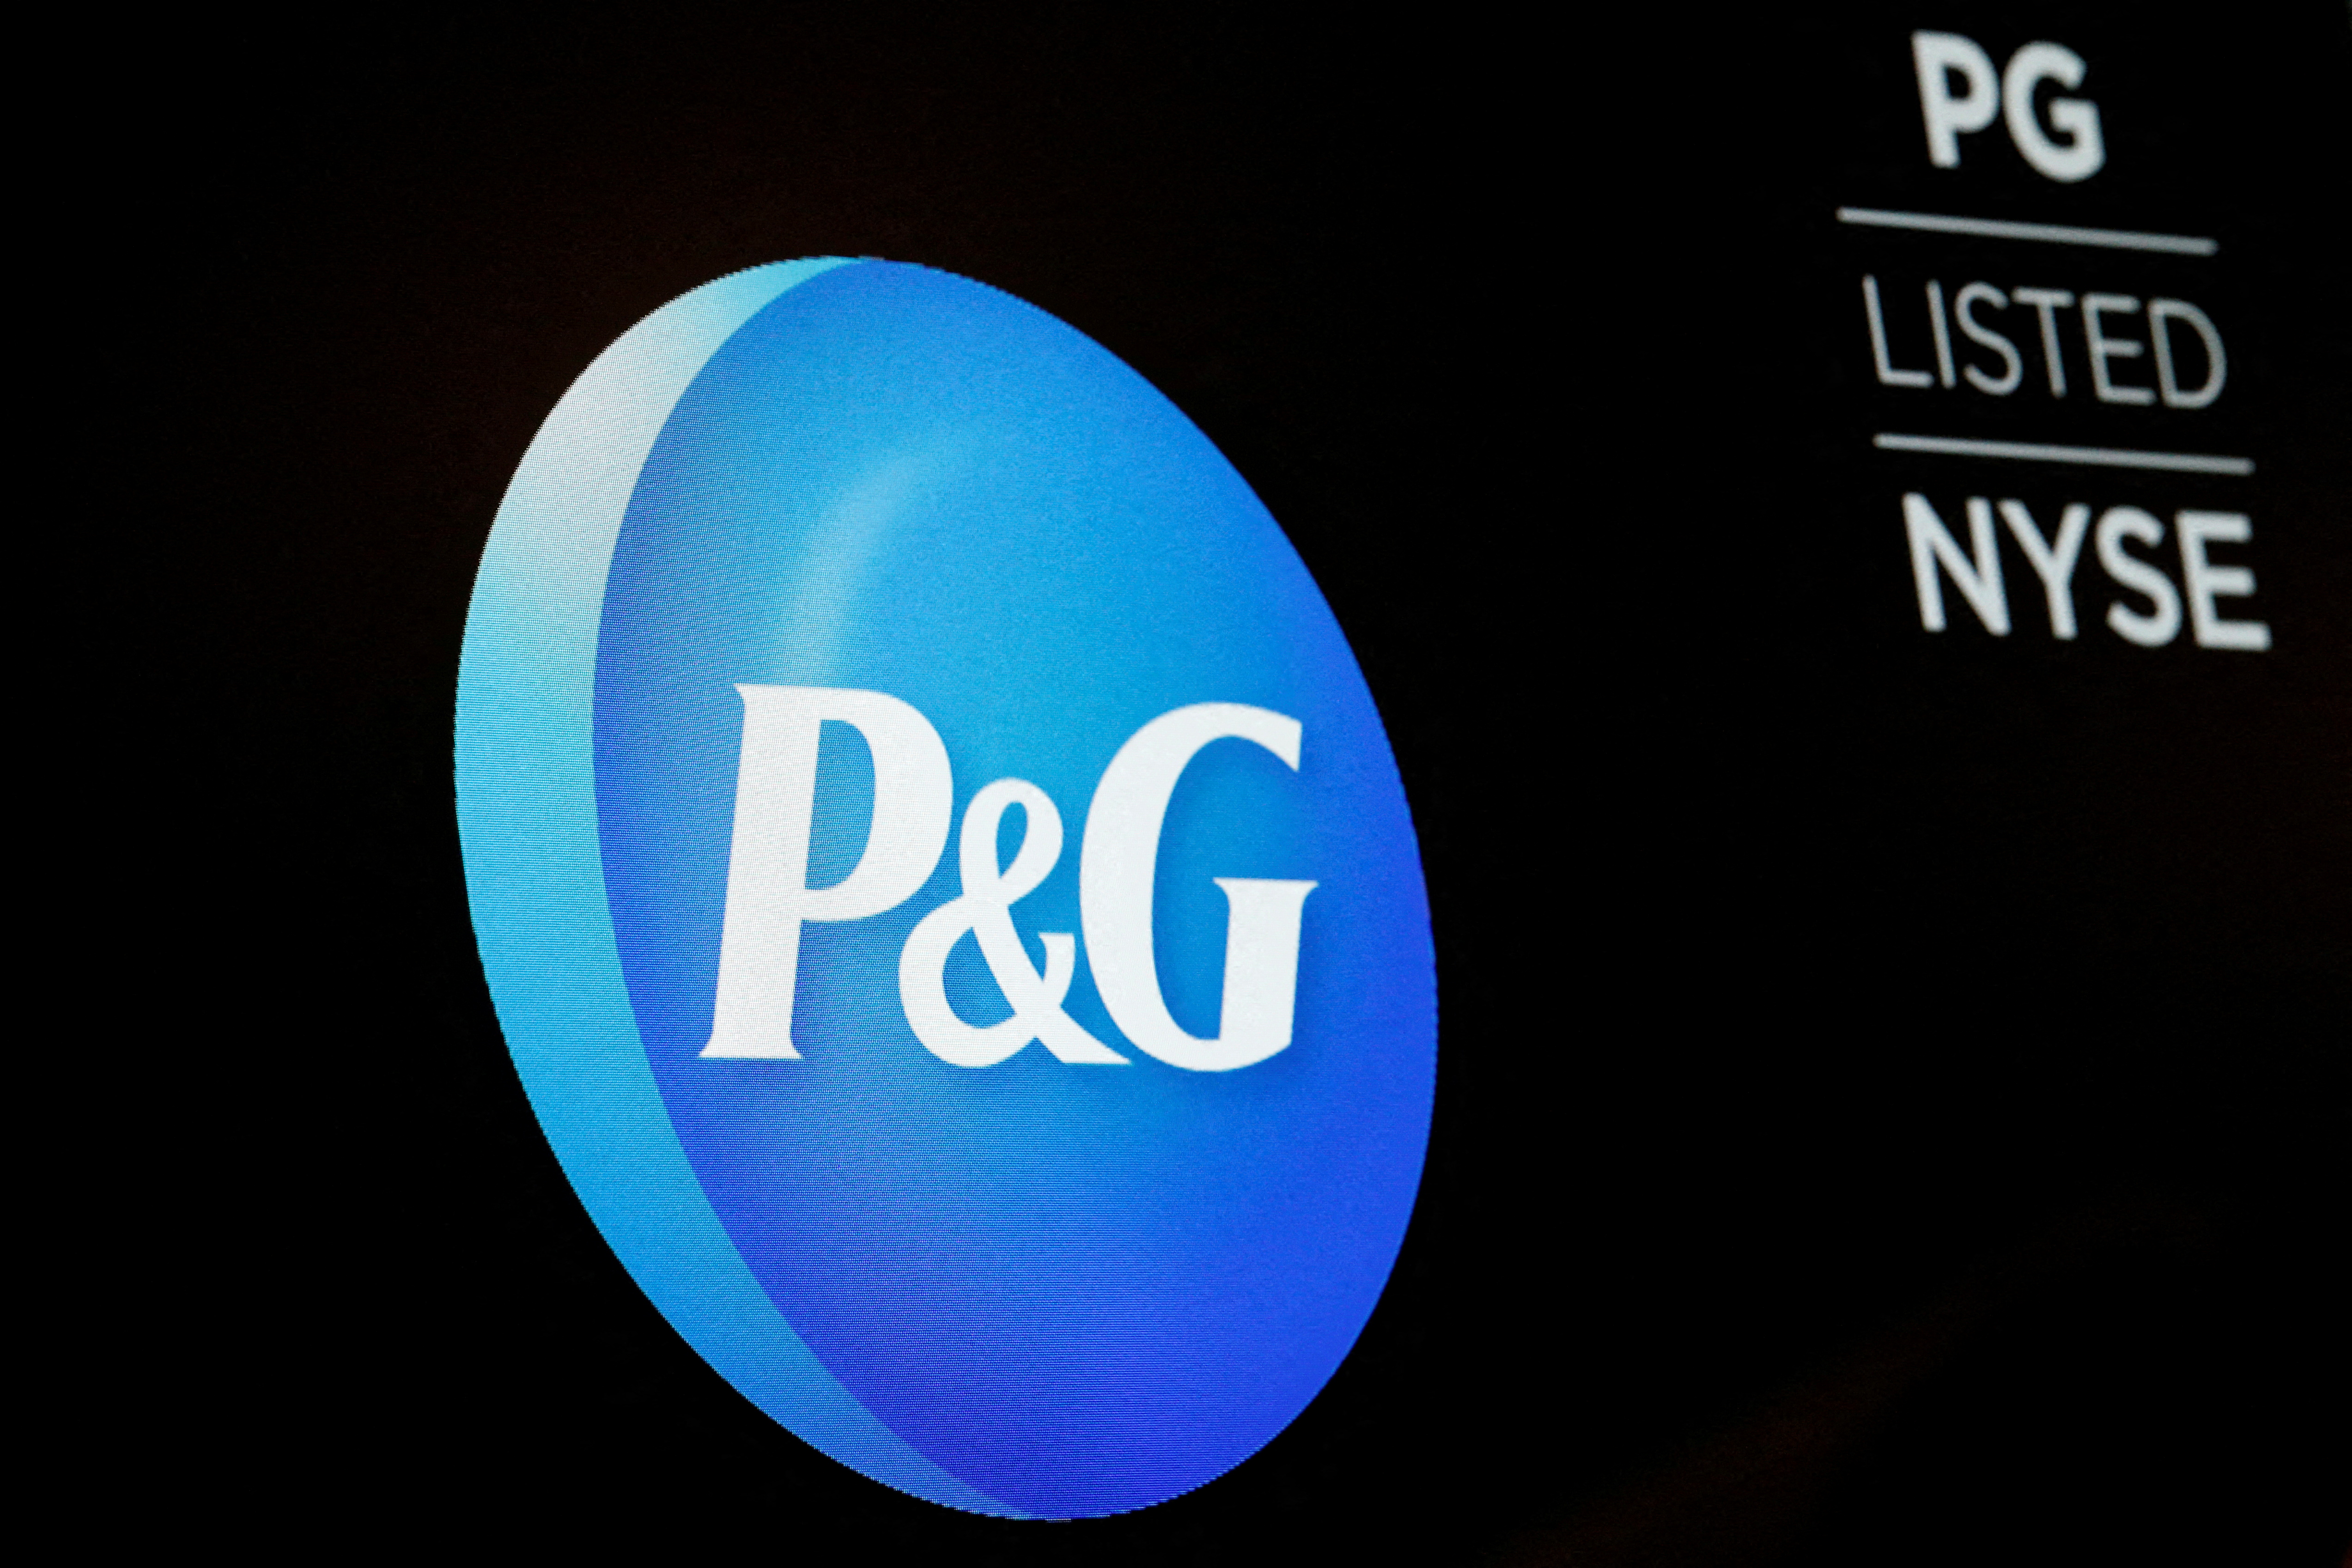 The logo for Procter & Gamble Co. is displayed on a screen on the floor of the NYSE in New York